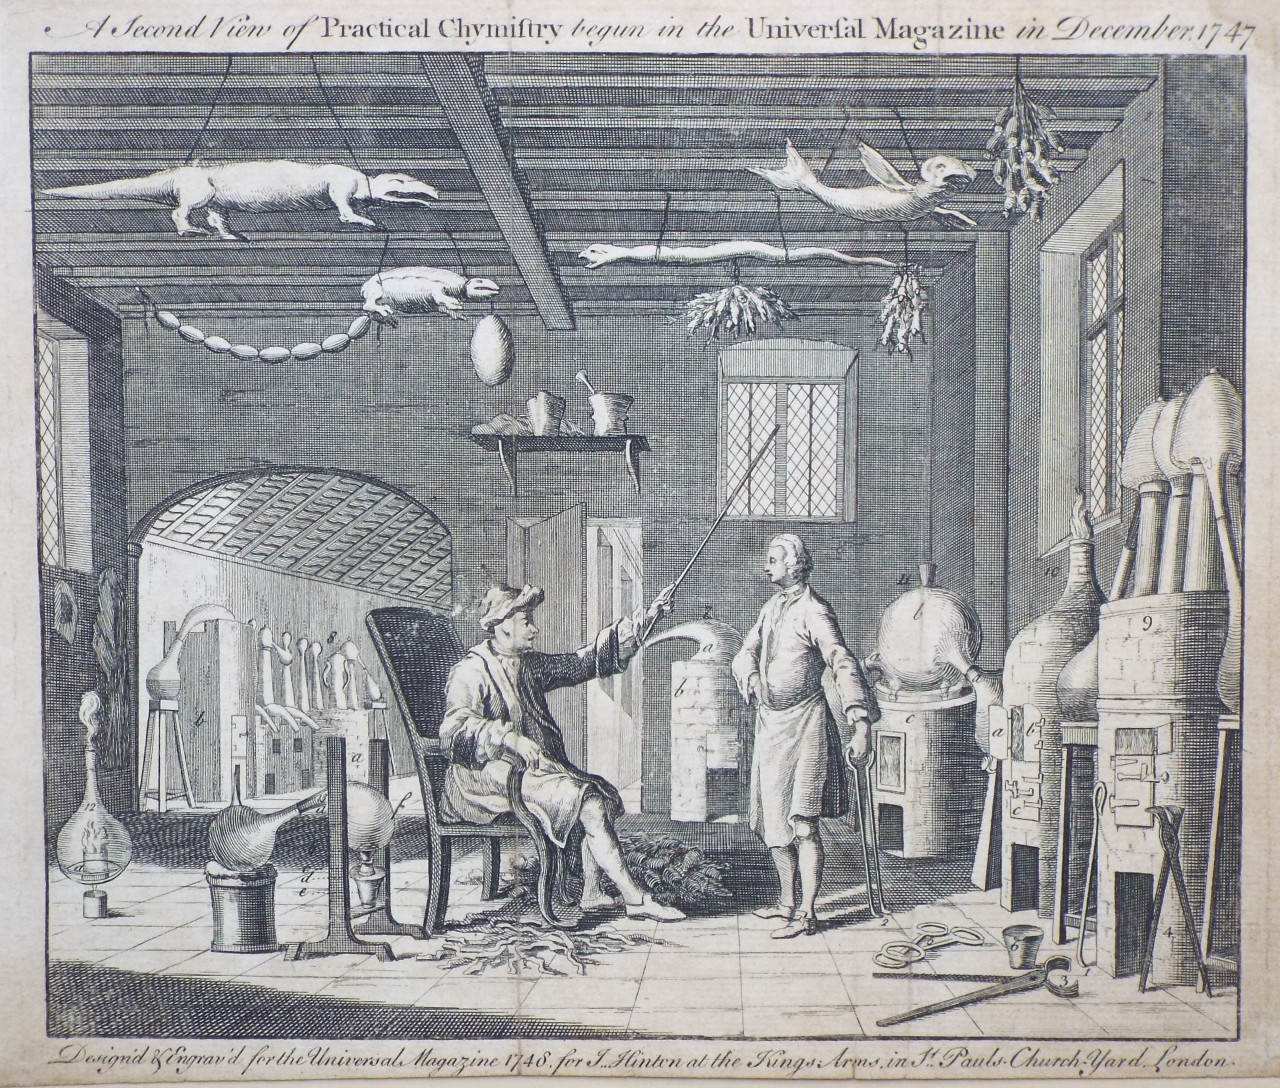 Print - A Second View of Practical Chymistry begun in the Universal Magazine in December, 1747.